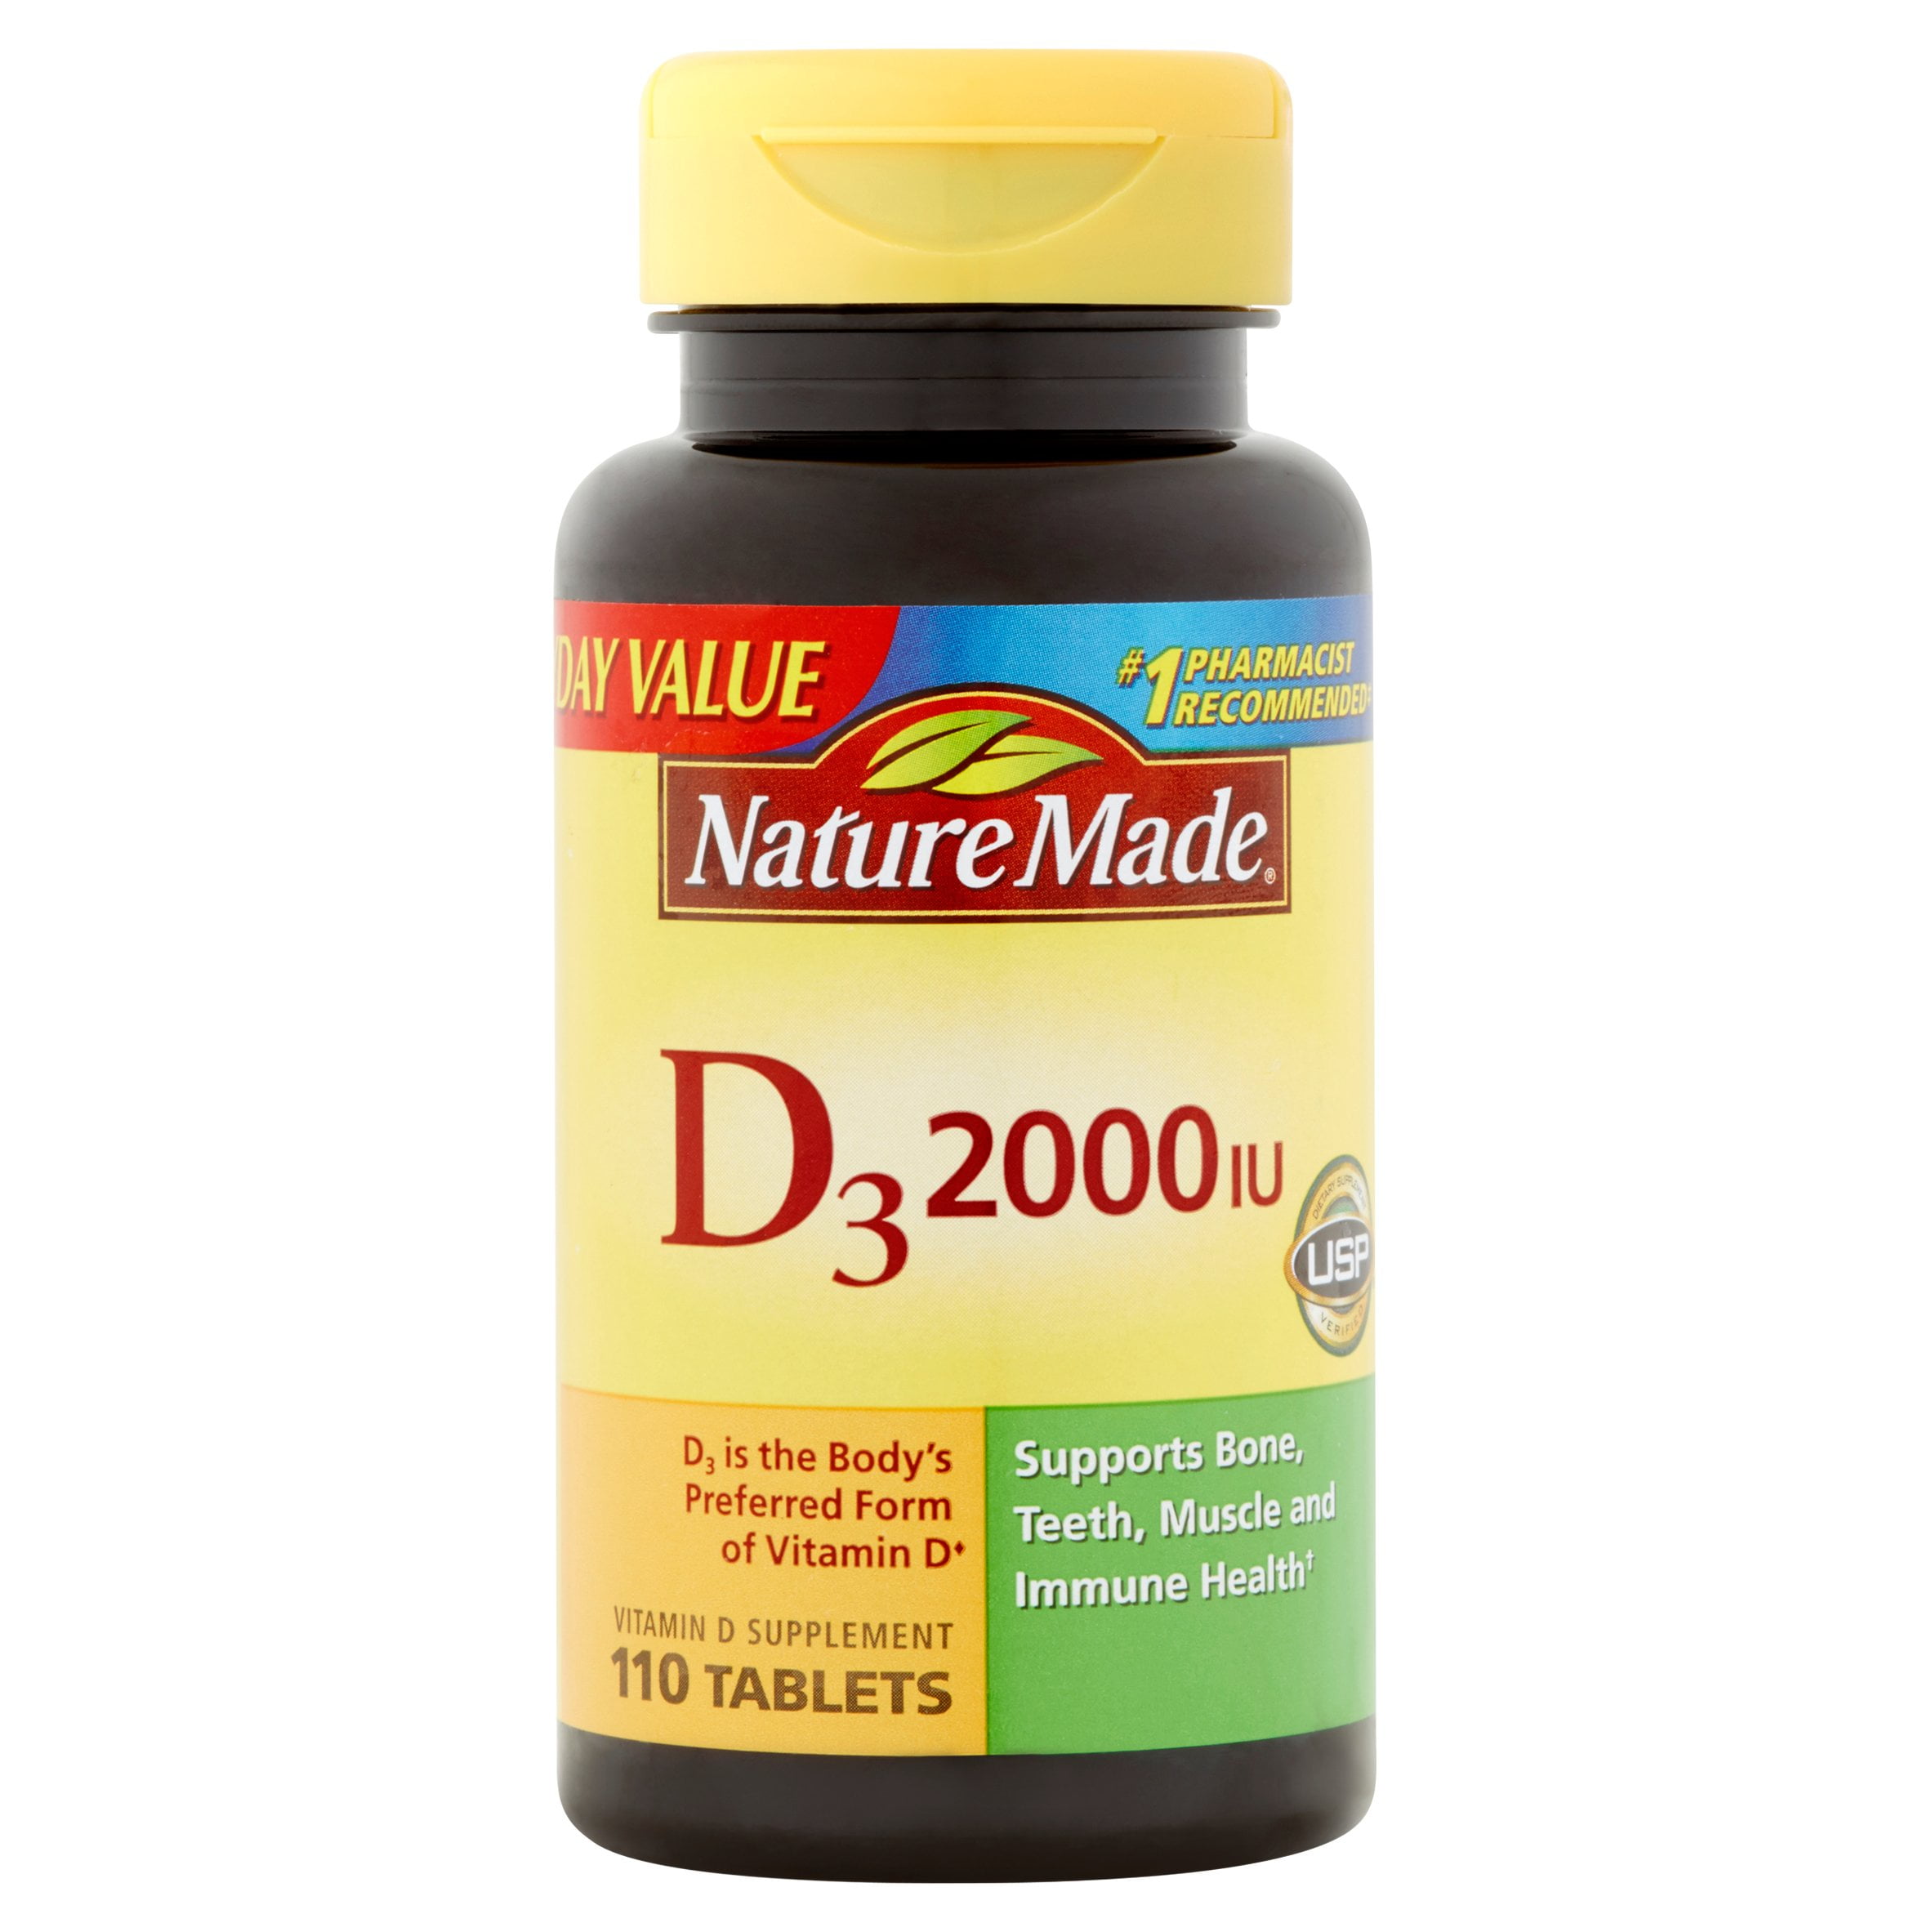 nature-made-vitamin-d3-dietary-supplement-tablets-2000-i-u-110-ct